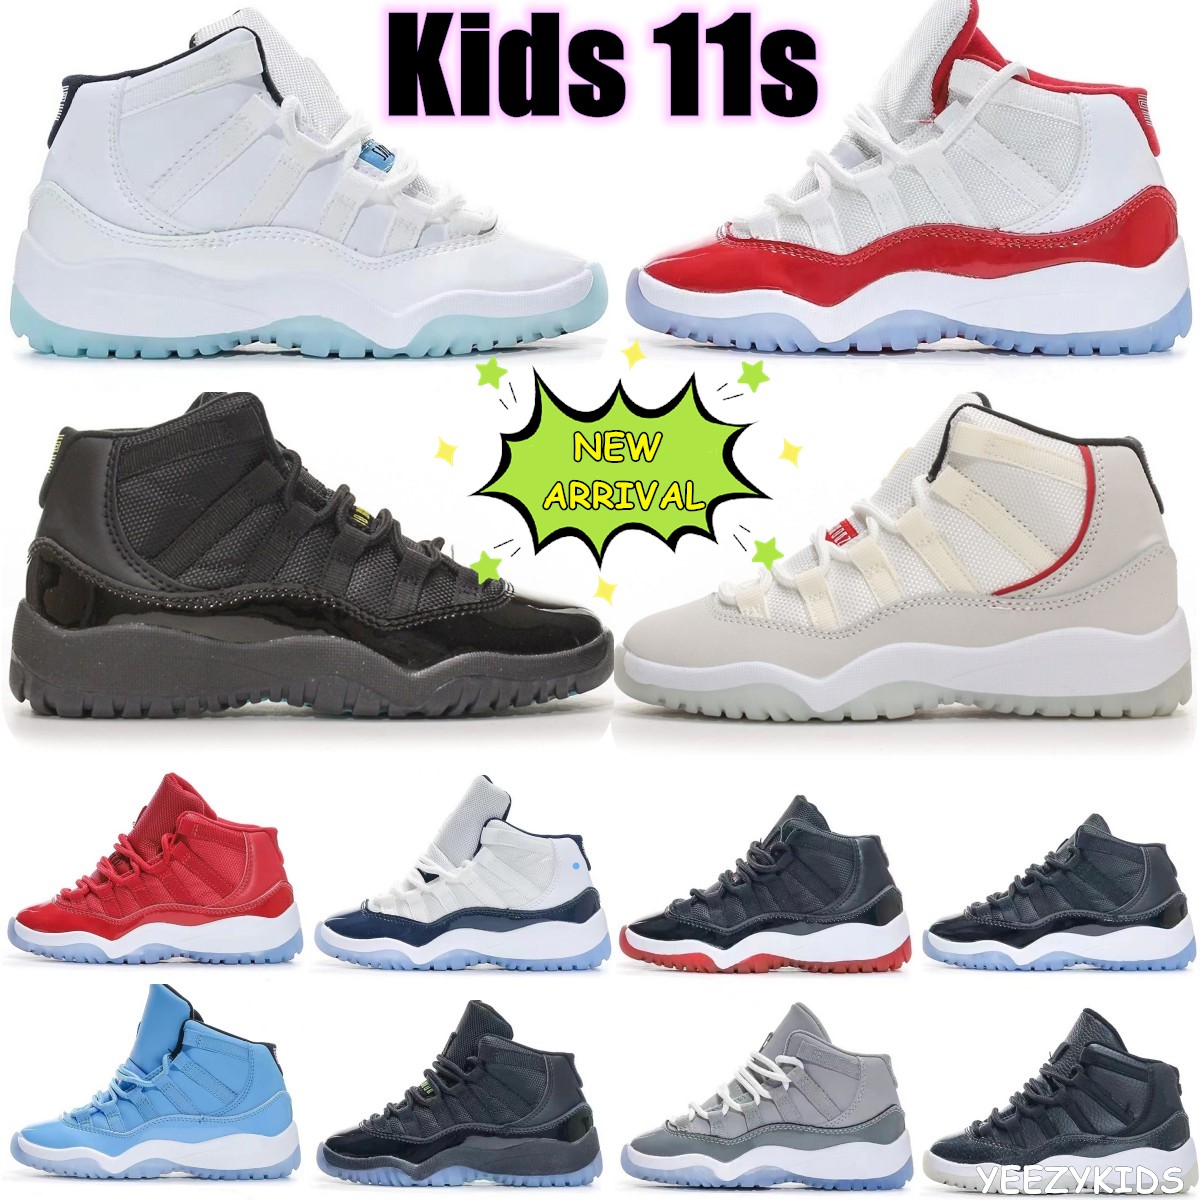 

Kids Shoes unc Cherry Jumpman 11s boys basketball 11 shoe Children black mid high sneaker Chicago designer military grey trainers baby kid youth toddler